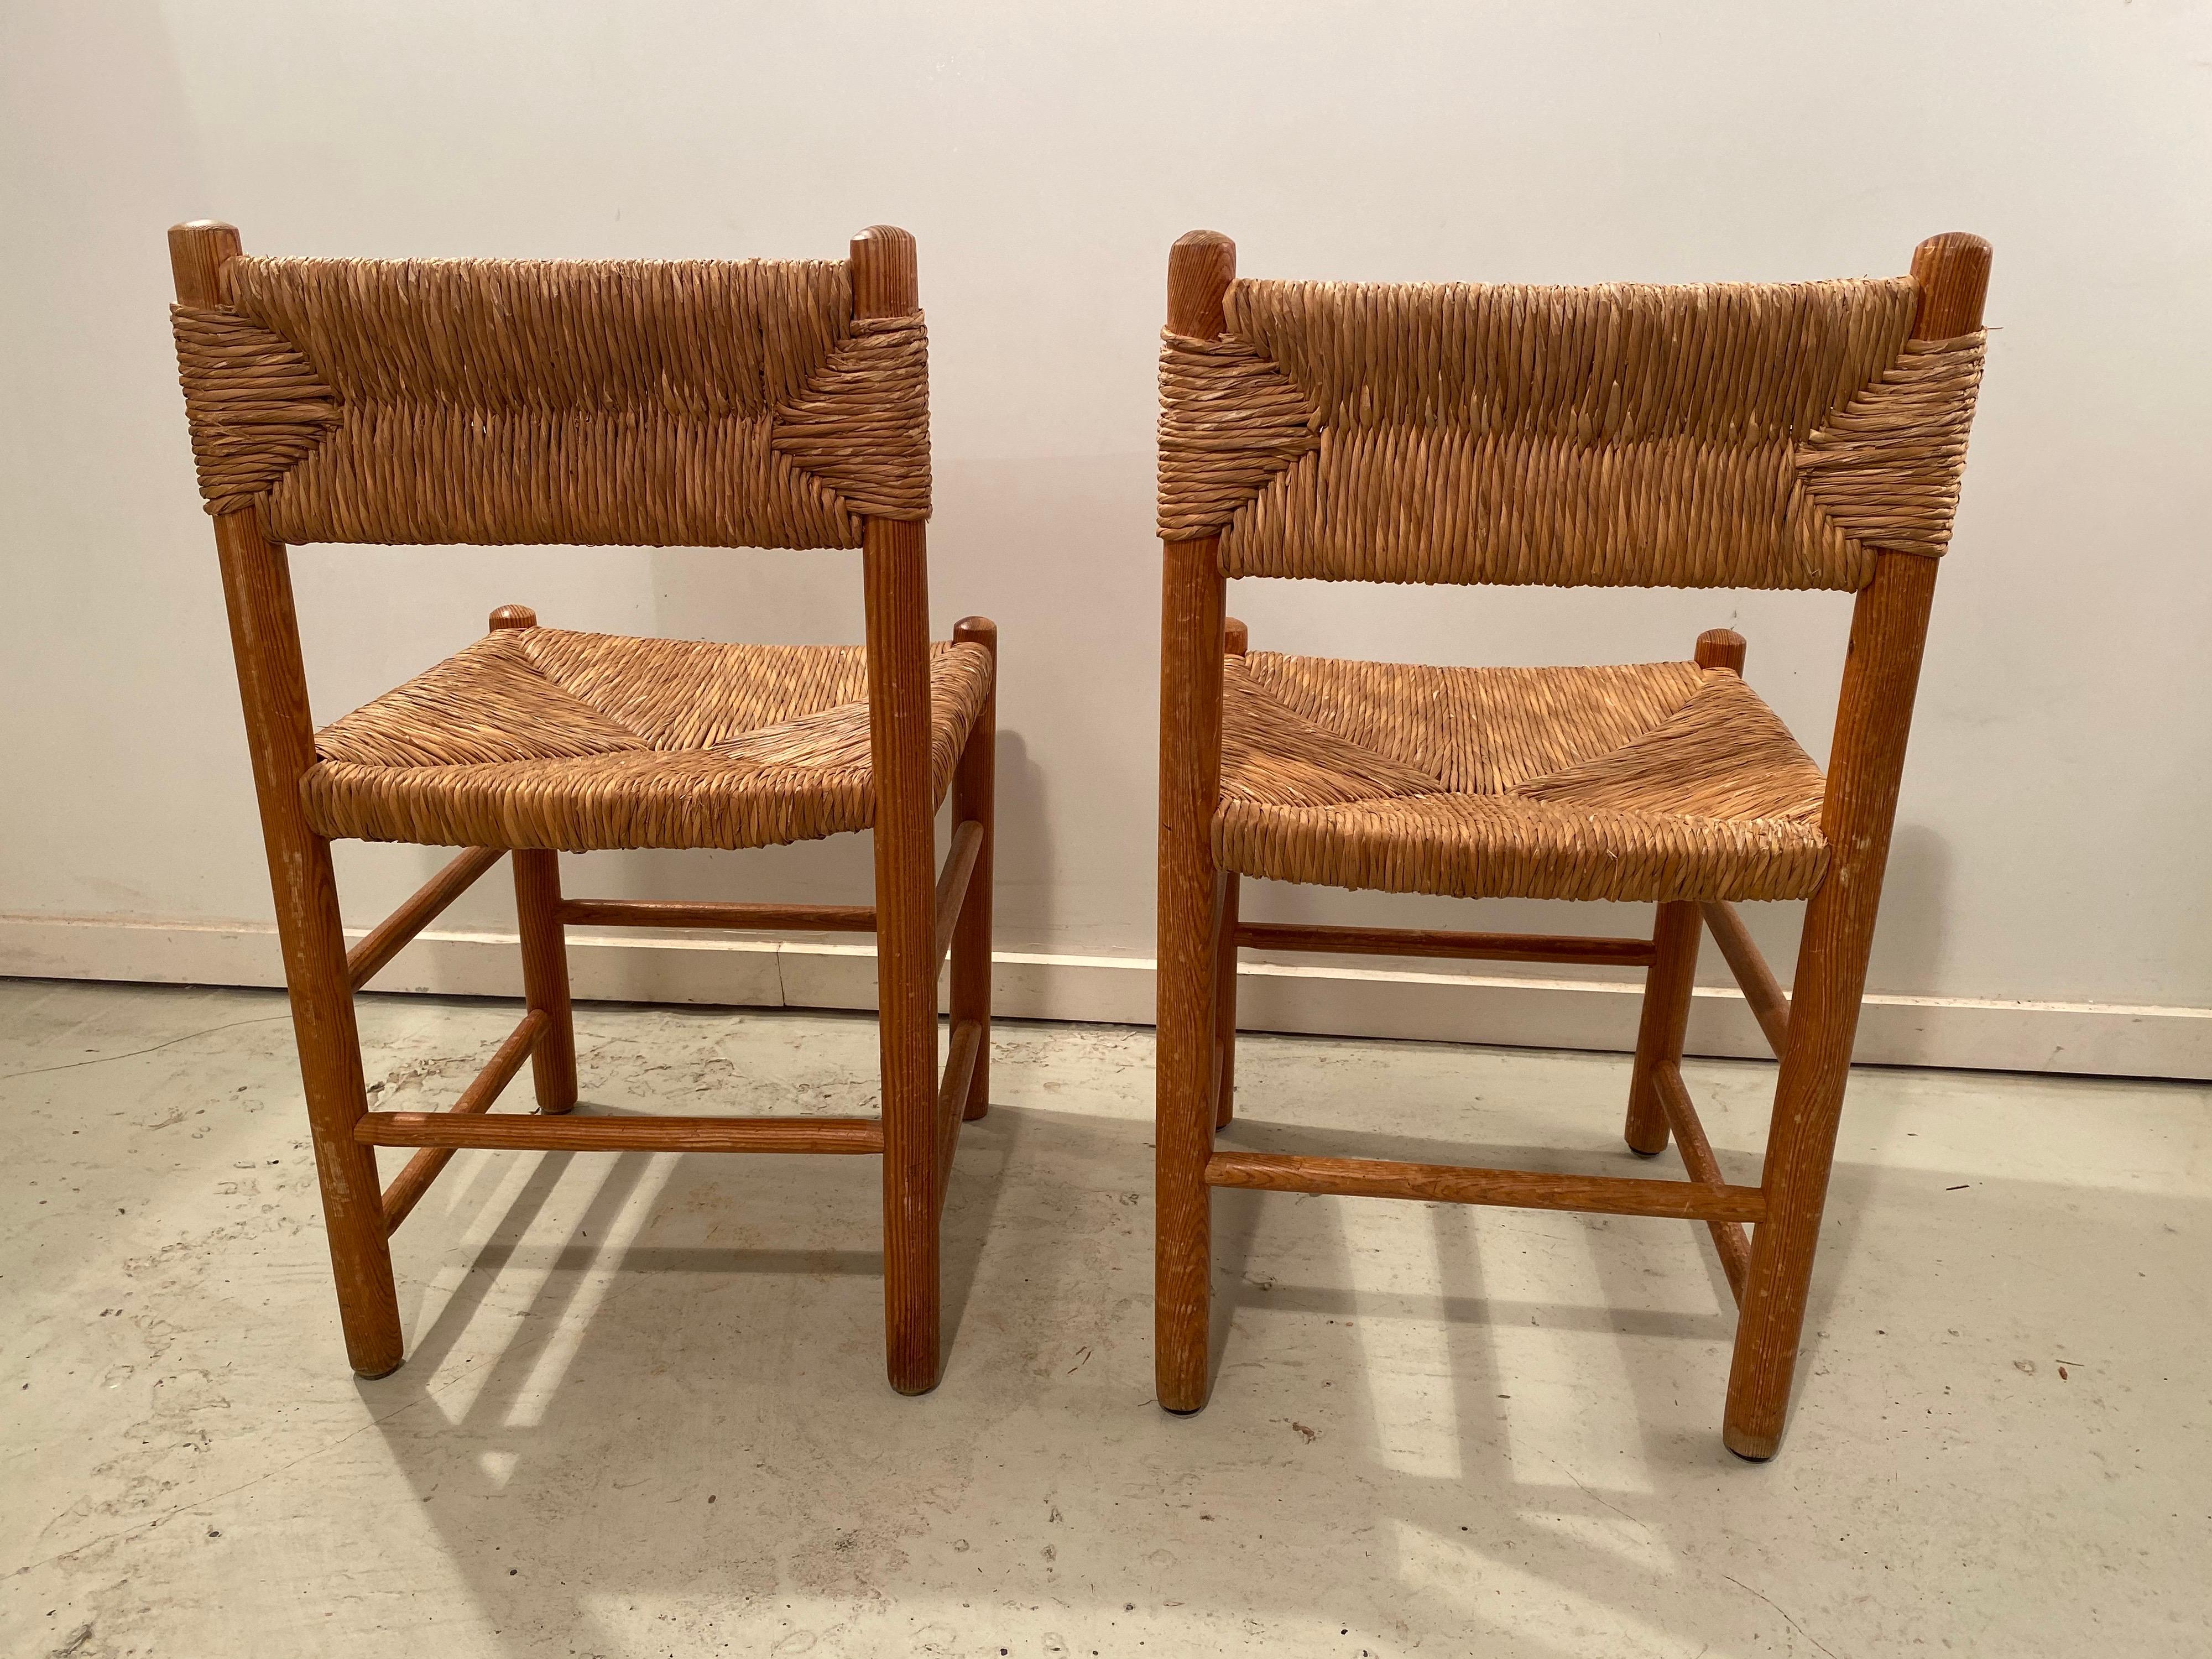 Mid-Century Modern Pair of Wicker Dordogne Chairs by Charlotte Perriand for Sentou, 1950s For Sale